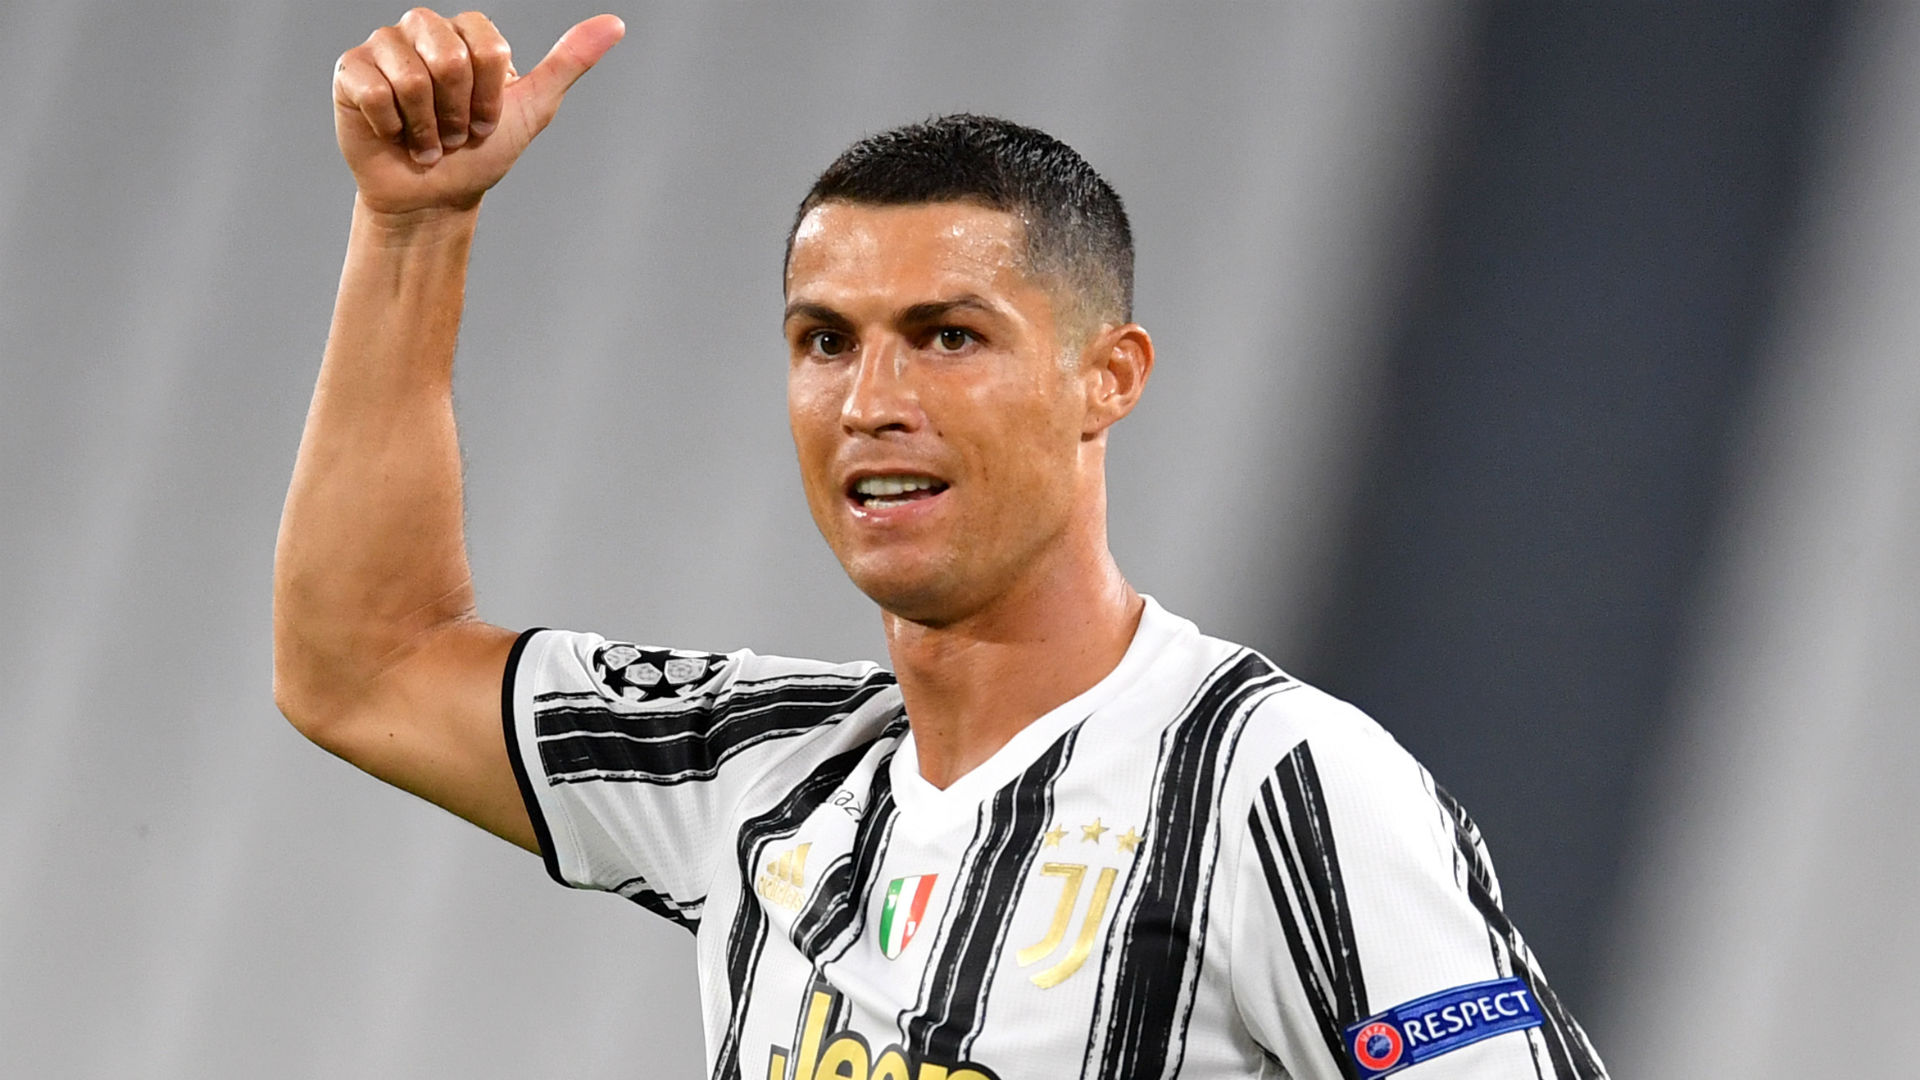 Cristiano makes history after Juve's victory in Coppa